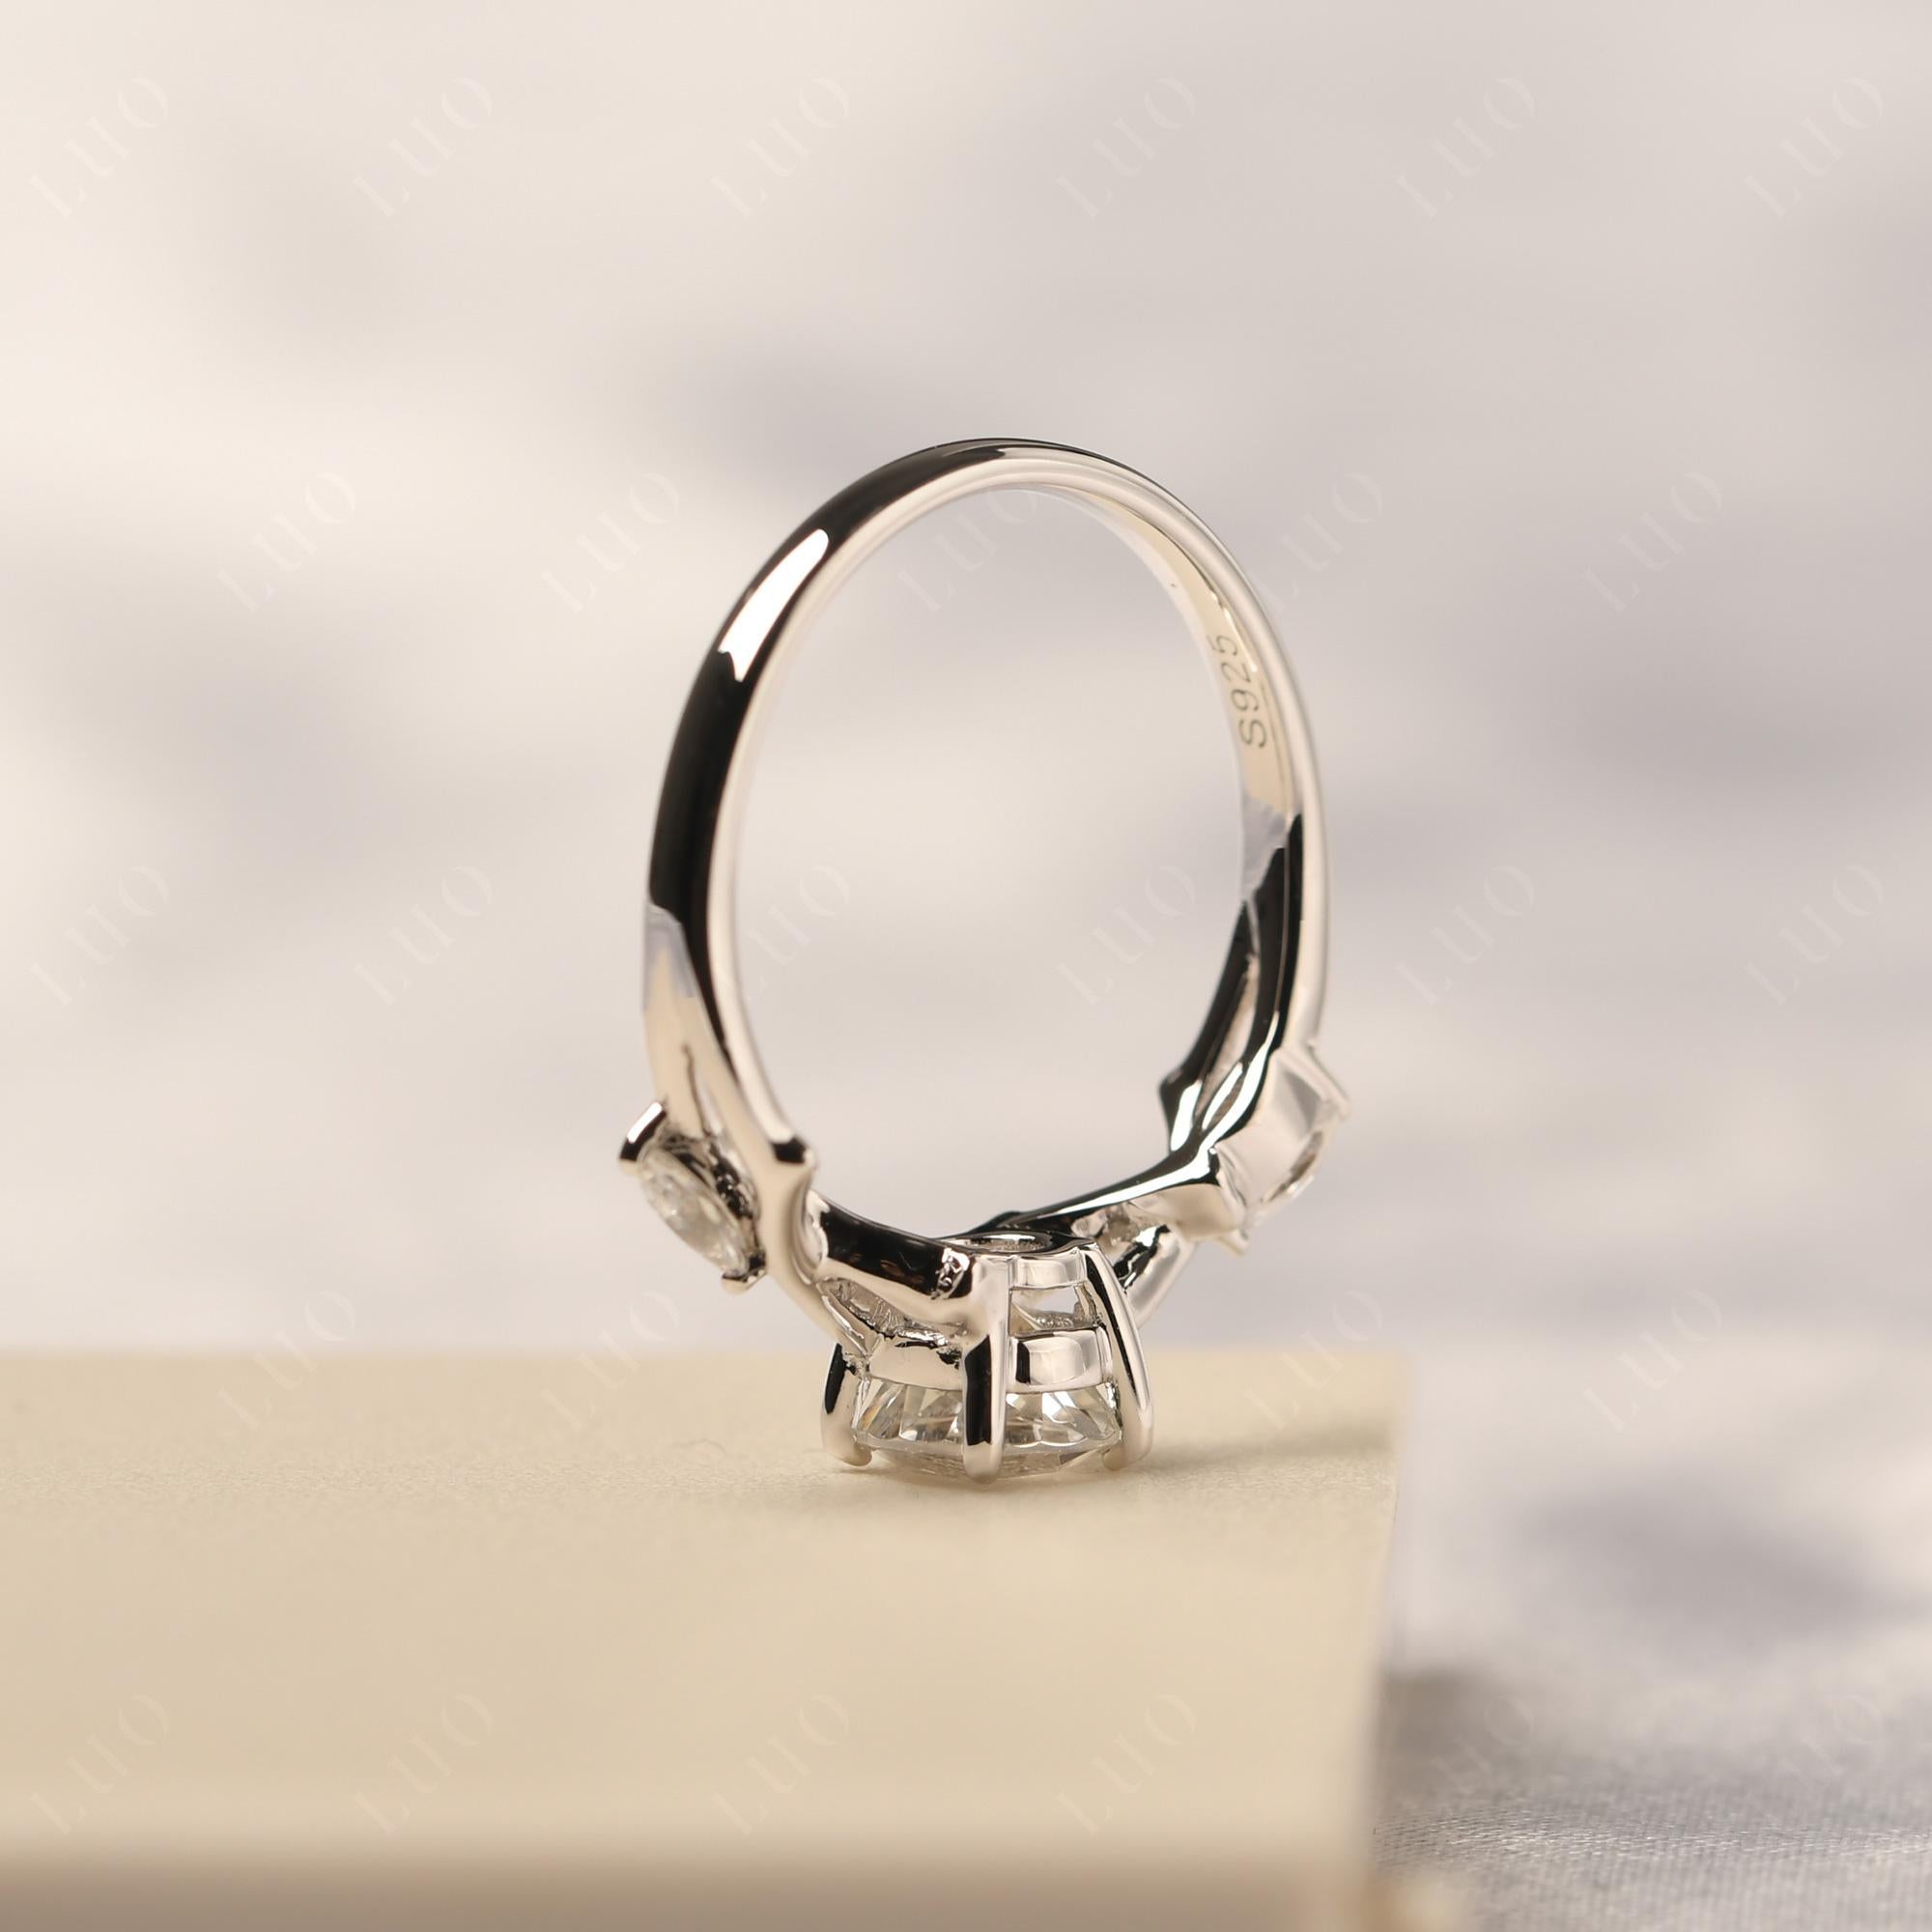 Twig White Topaz Engagement Ring - LUO Jewelry